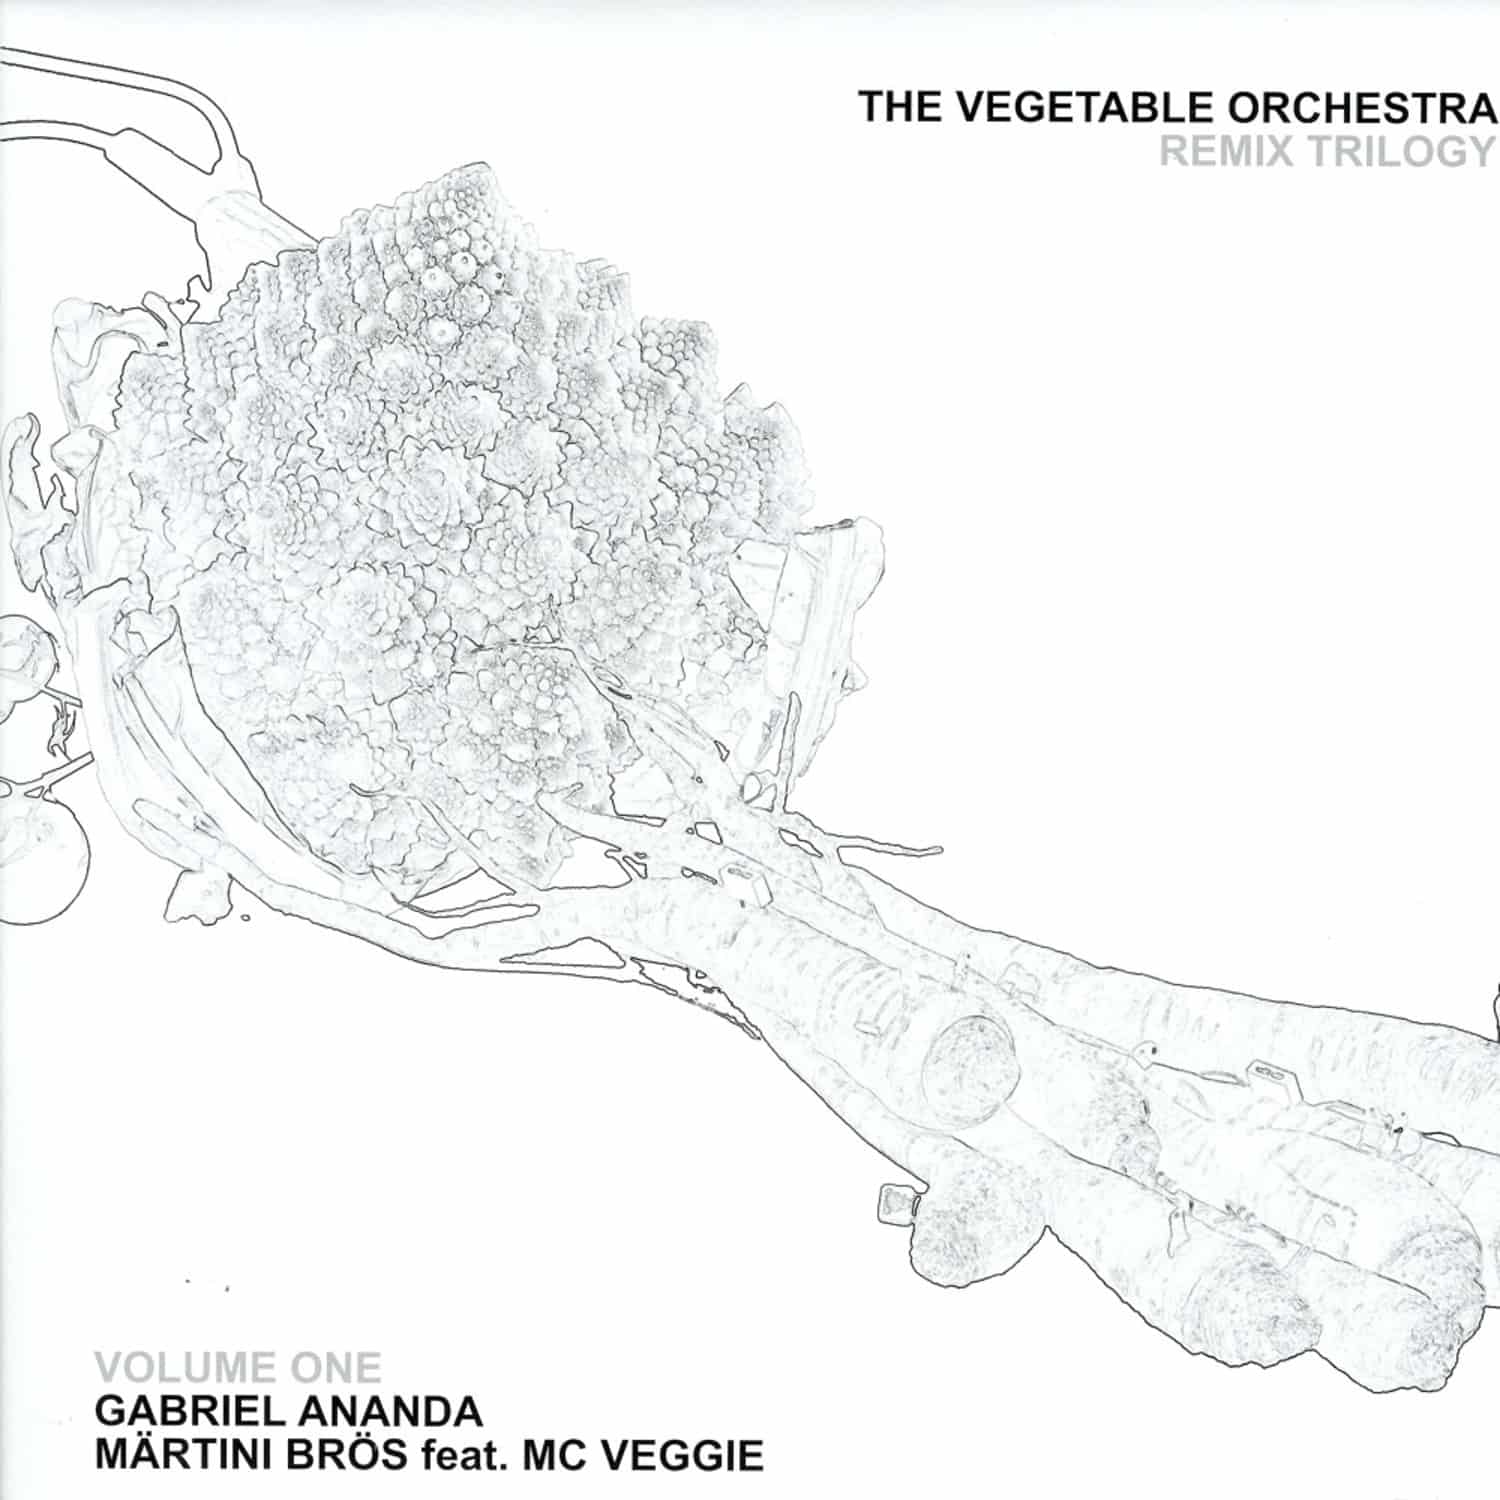 The Vegetable Orchestra - REMIX TRIOLOGY - VOLUME ONE